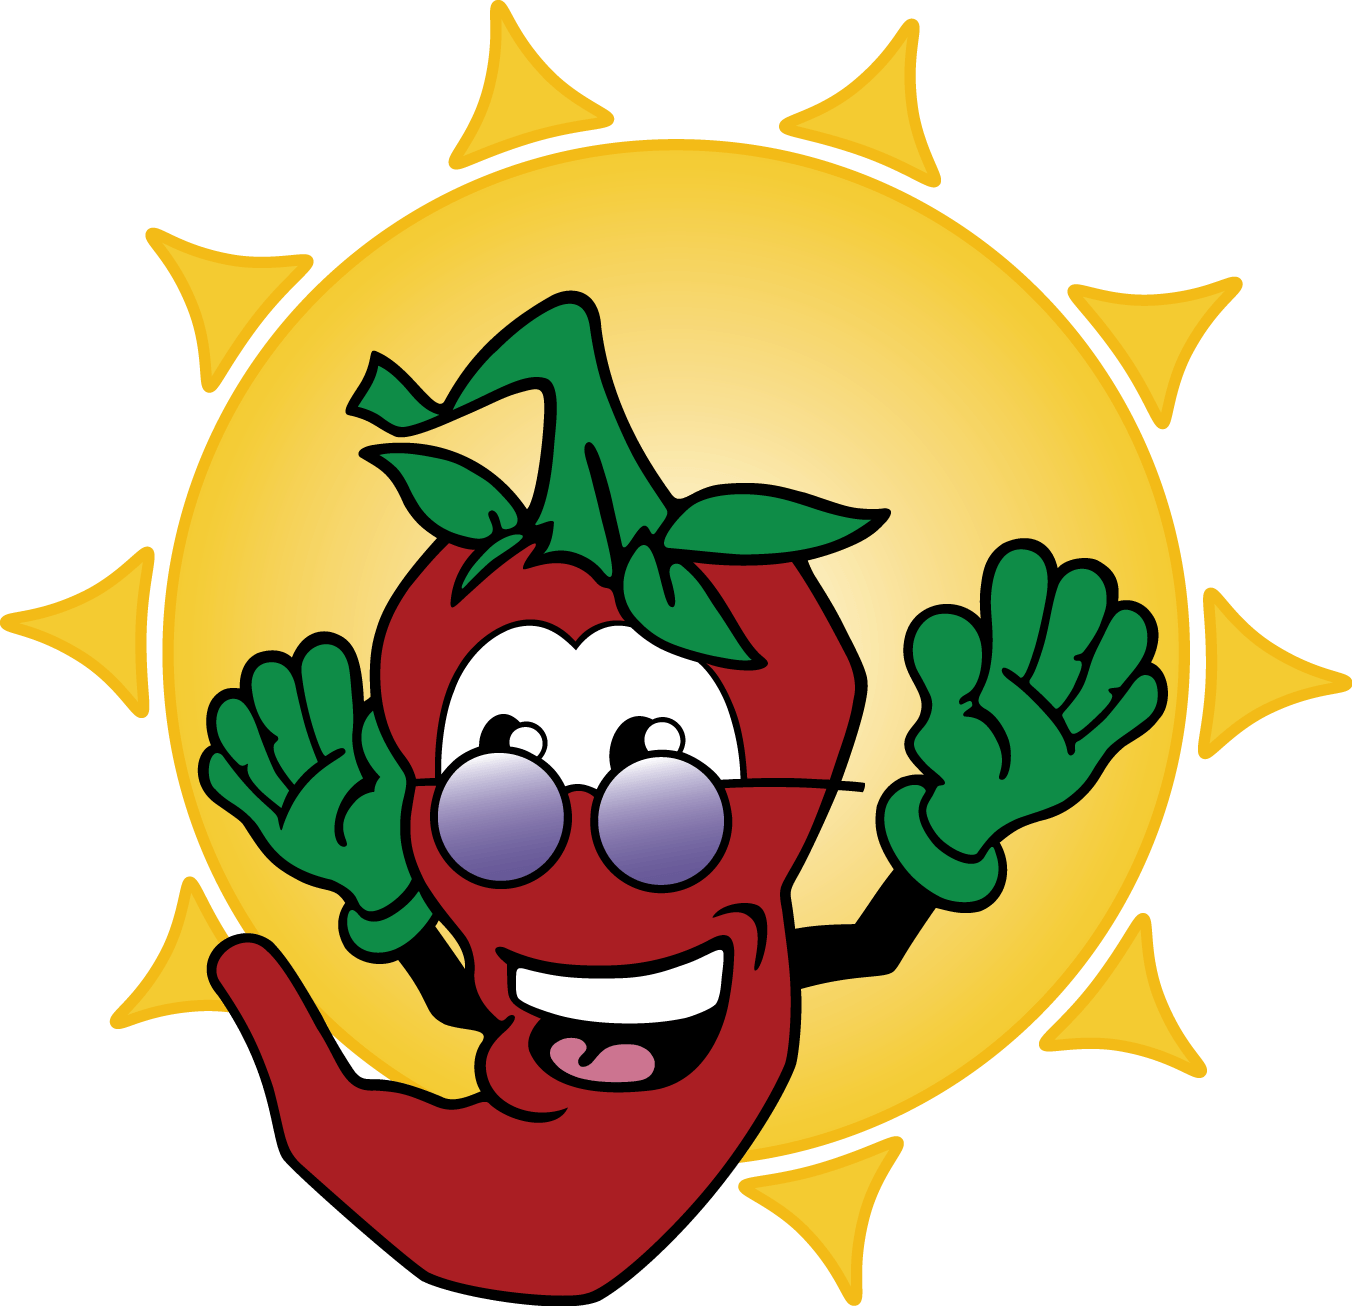 Chile Pepper Logo - WELCOME TO Chili Peppers Tanning